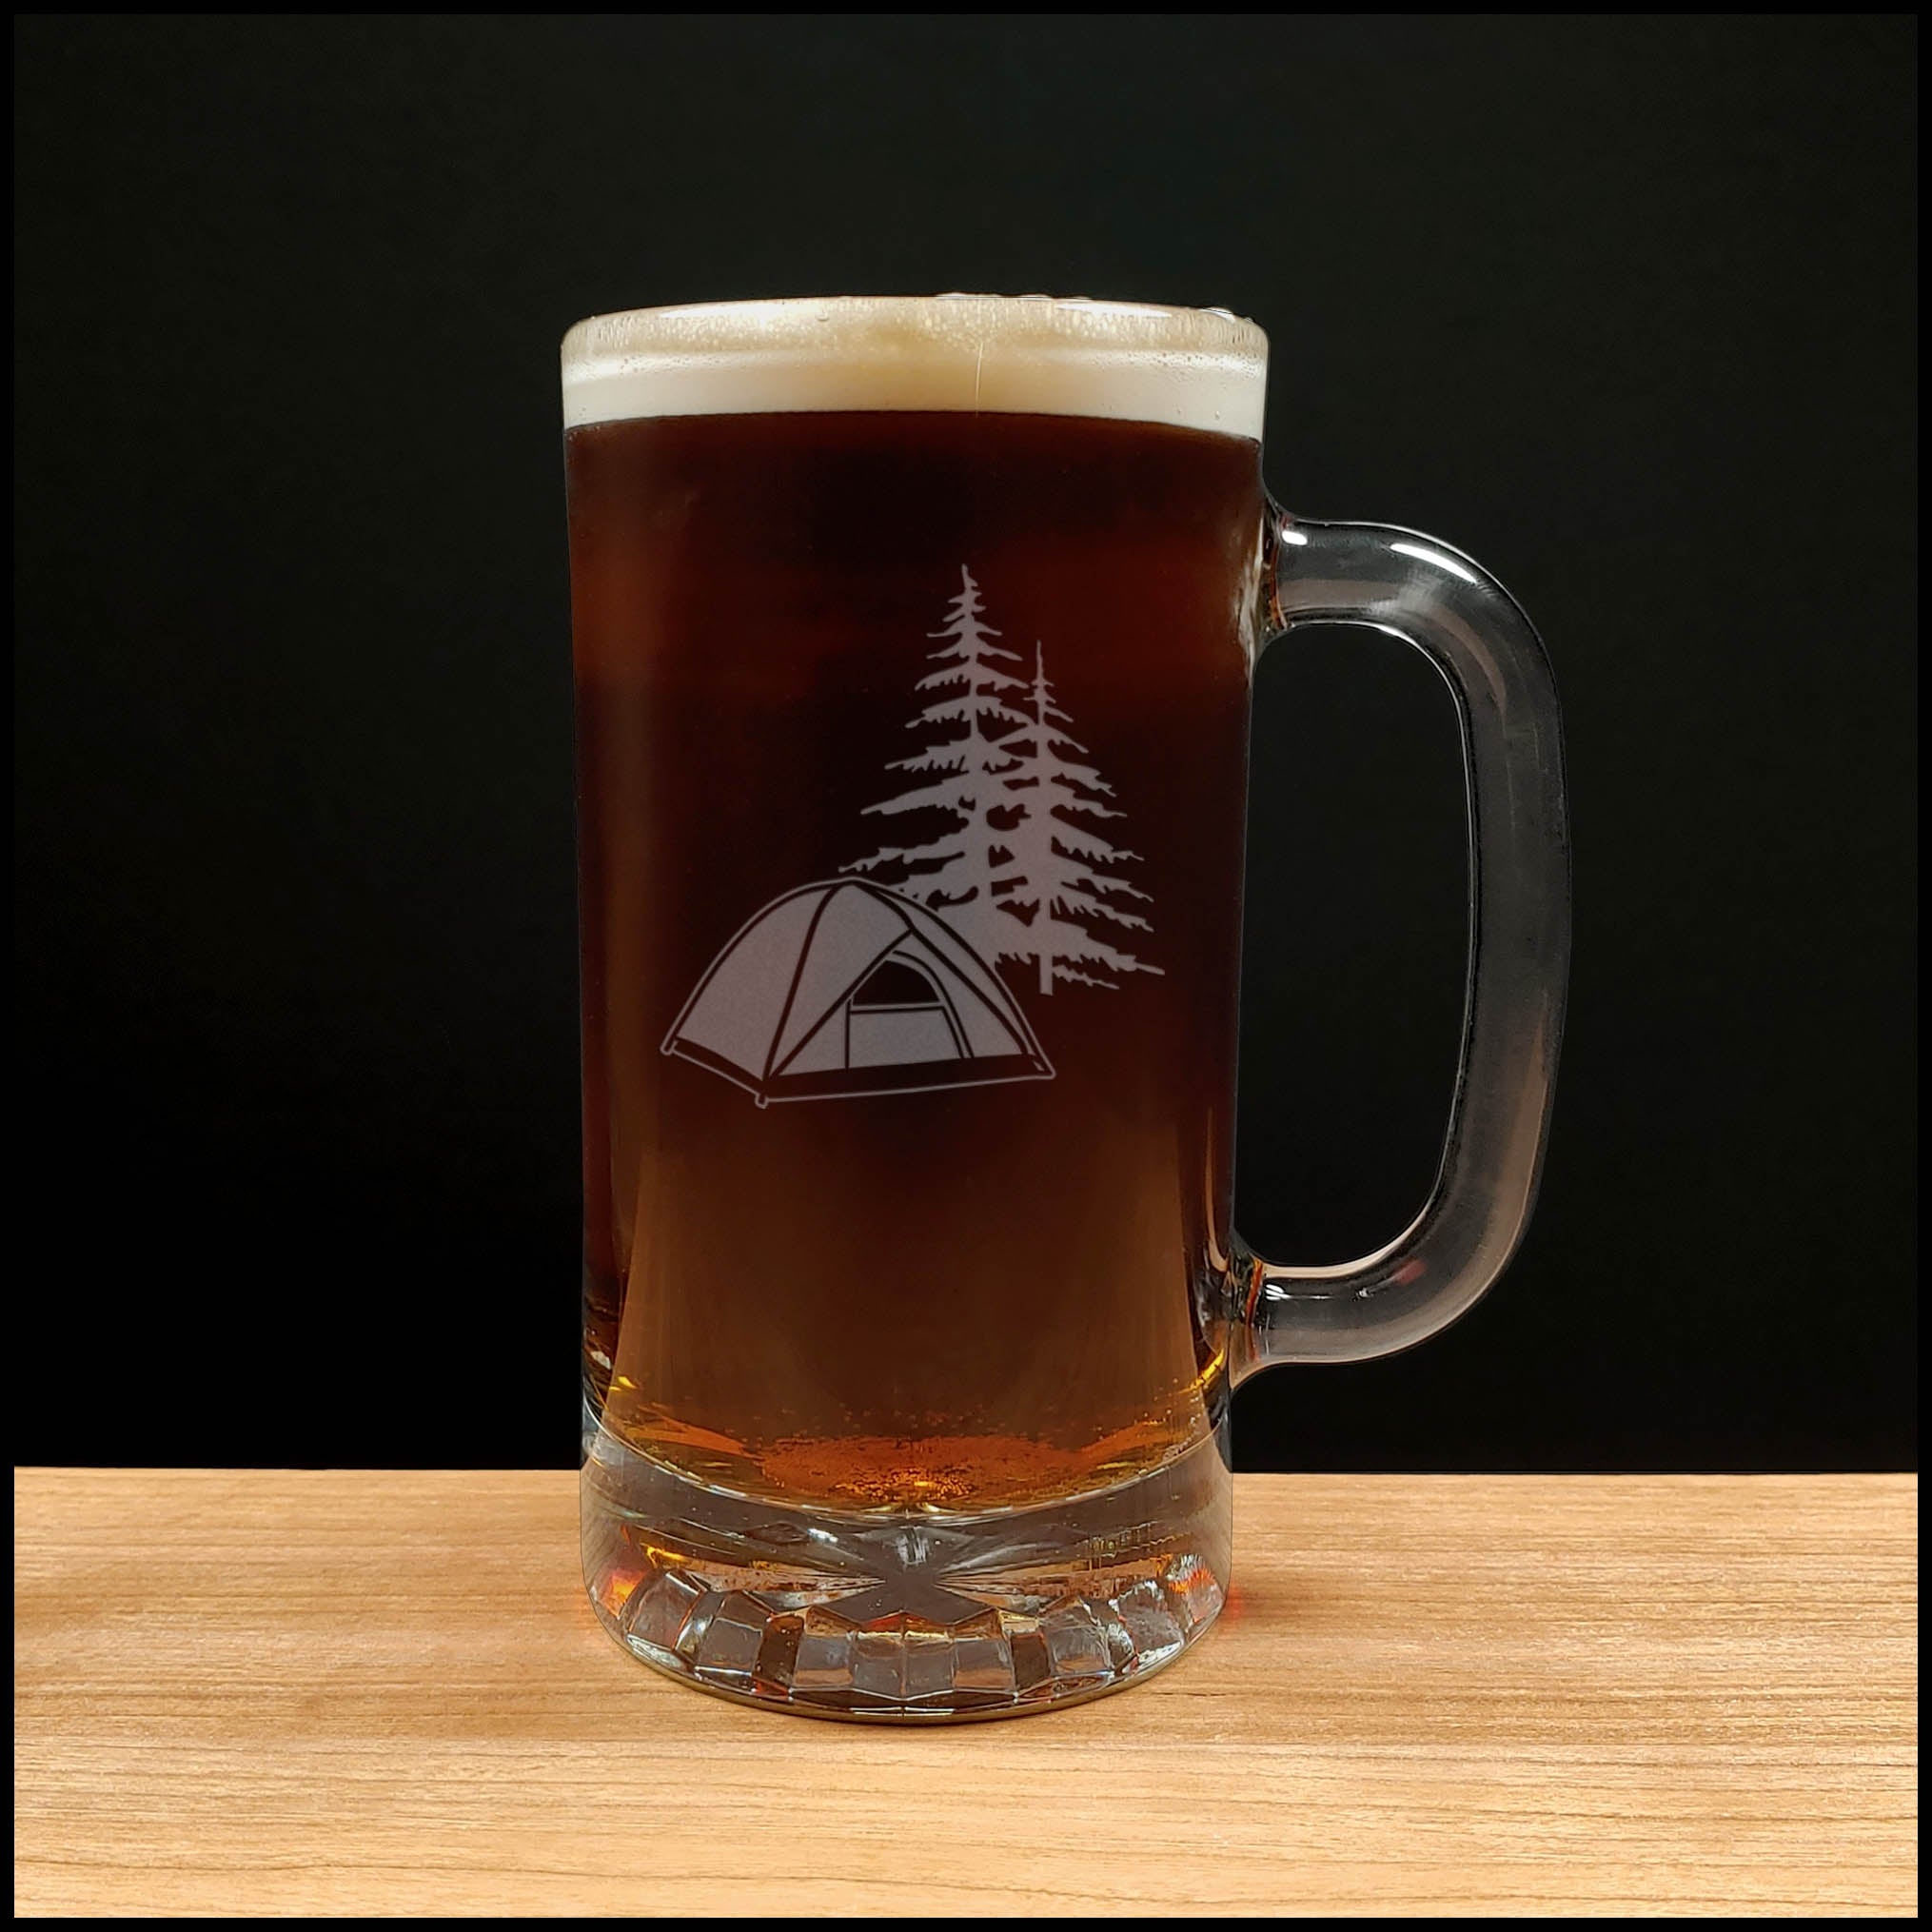 16oz Beer Mug with a design of tent and trees- Dark Beer - Copyright Hues in Glass